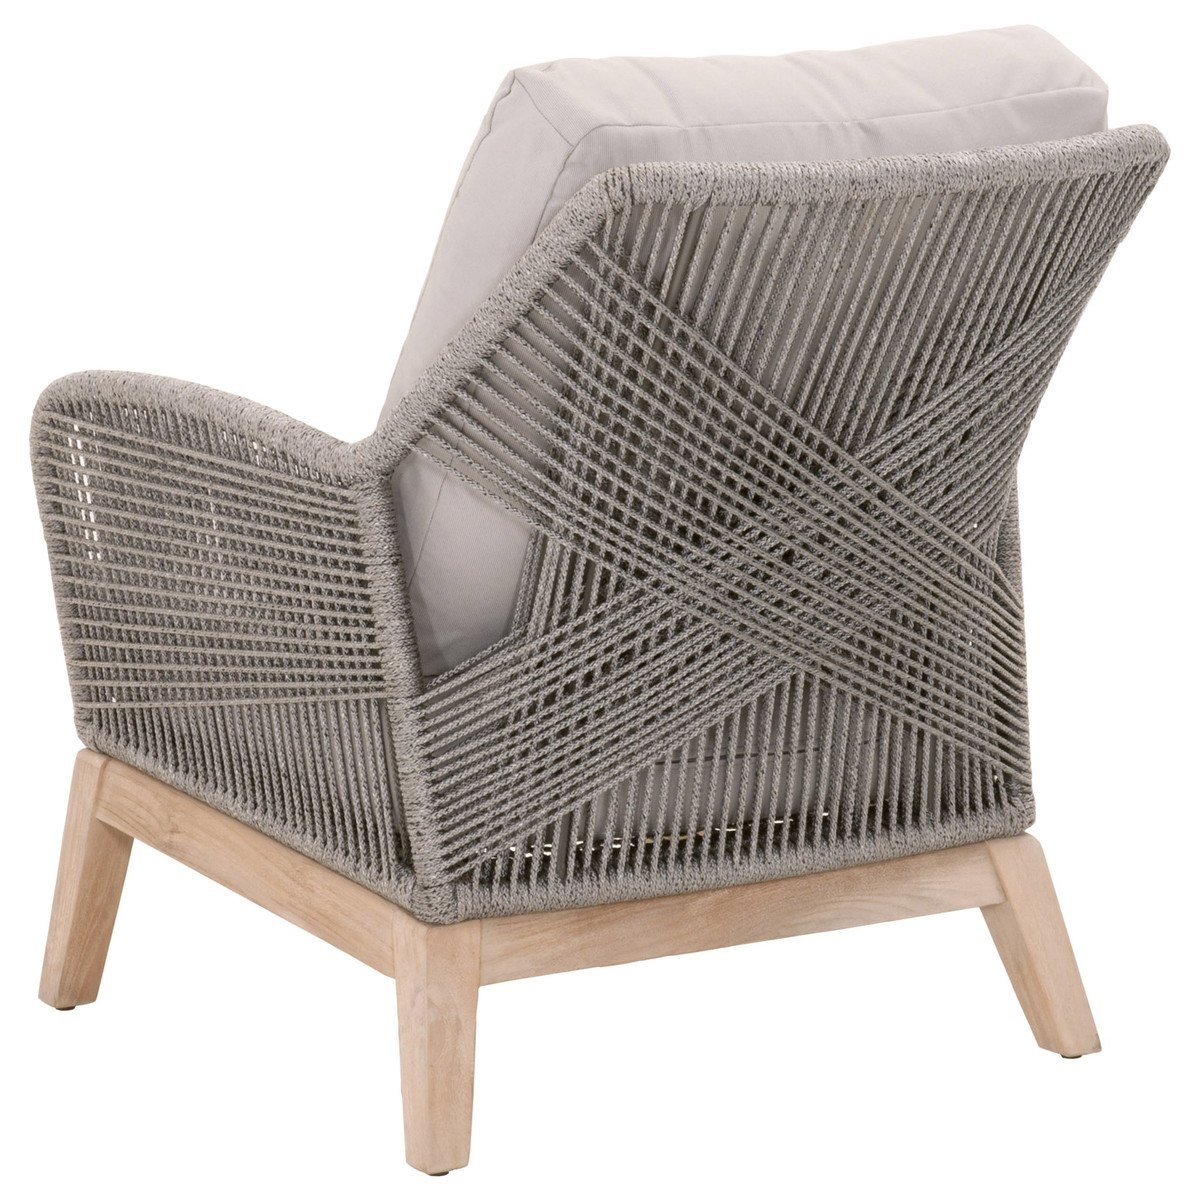 Loom Outdoor Club Chair - Image 2